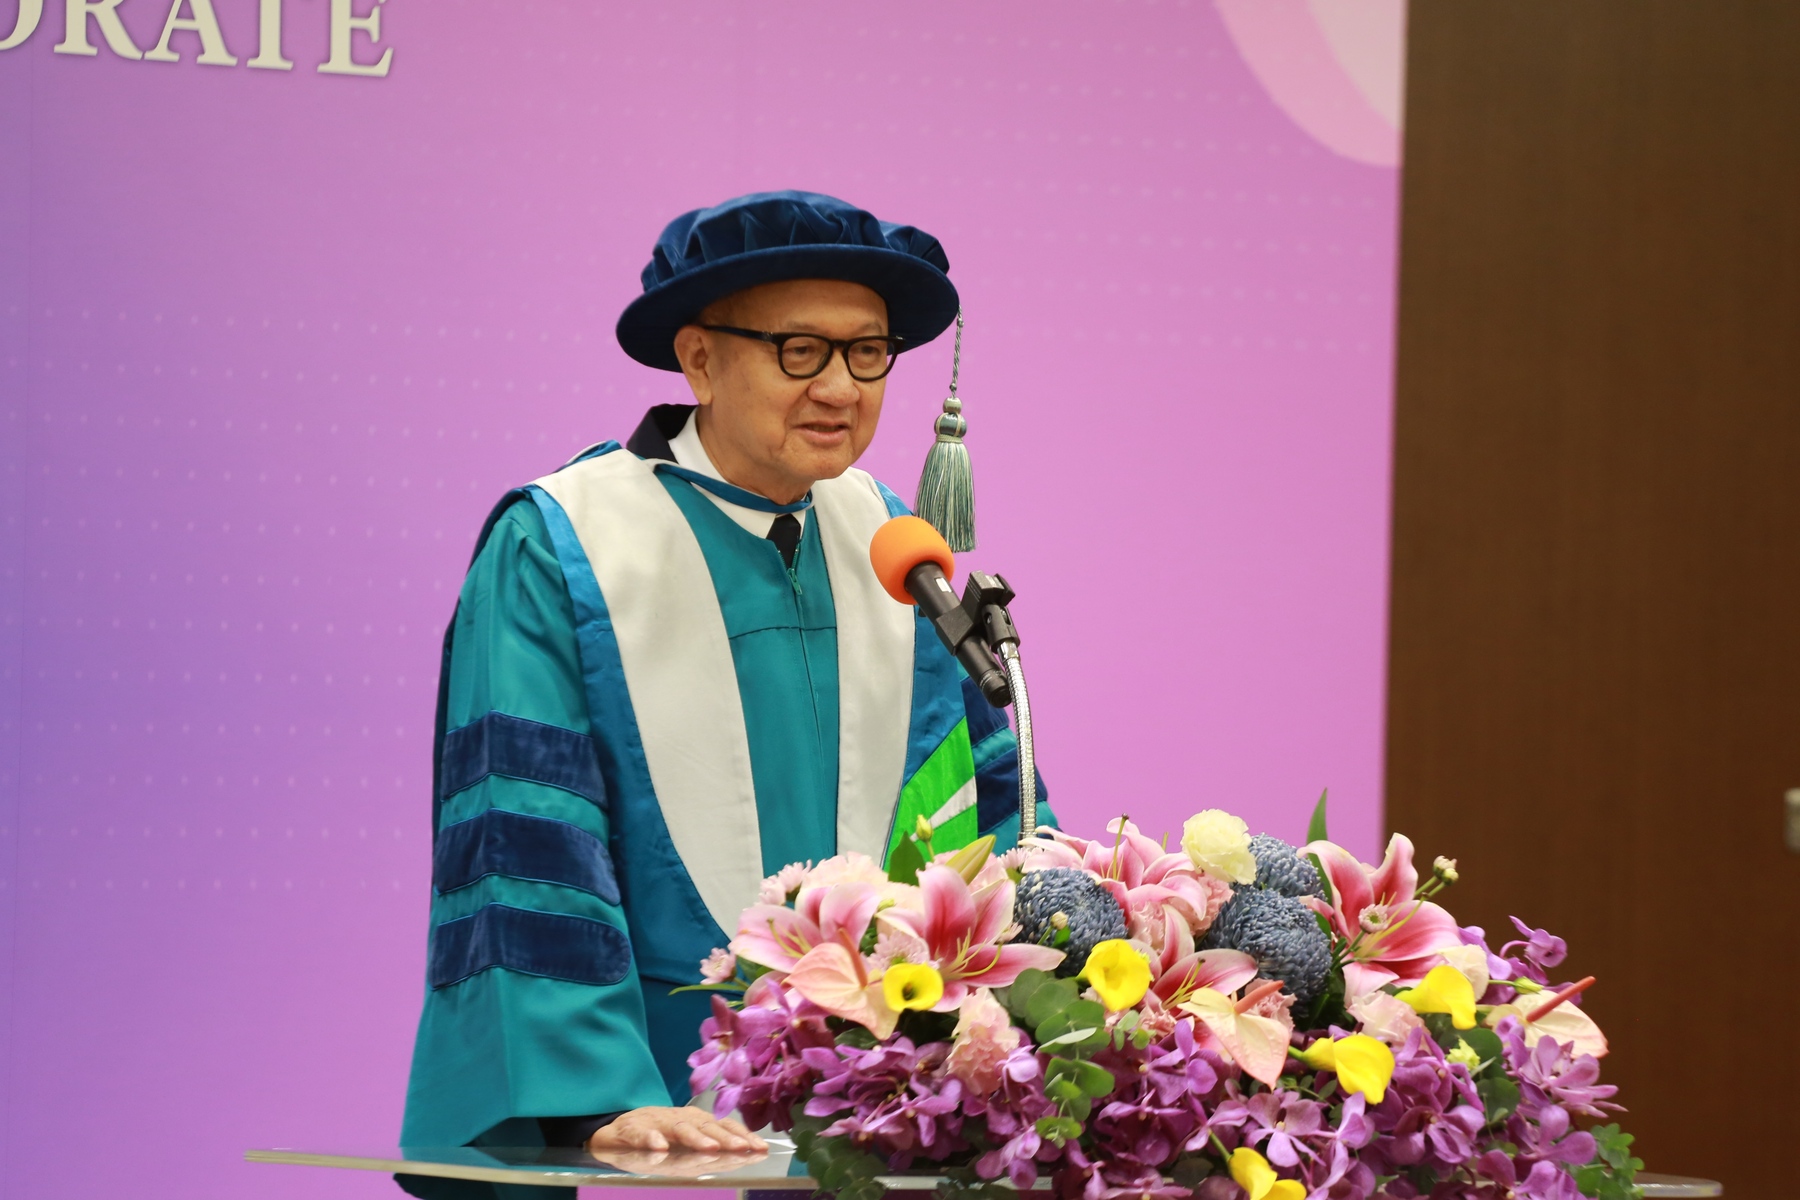 Chairman of Yageo Corporation Tie-Min Chen was conferred the Honorary Doctorate in Management.